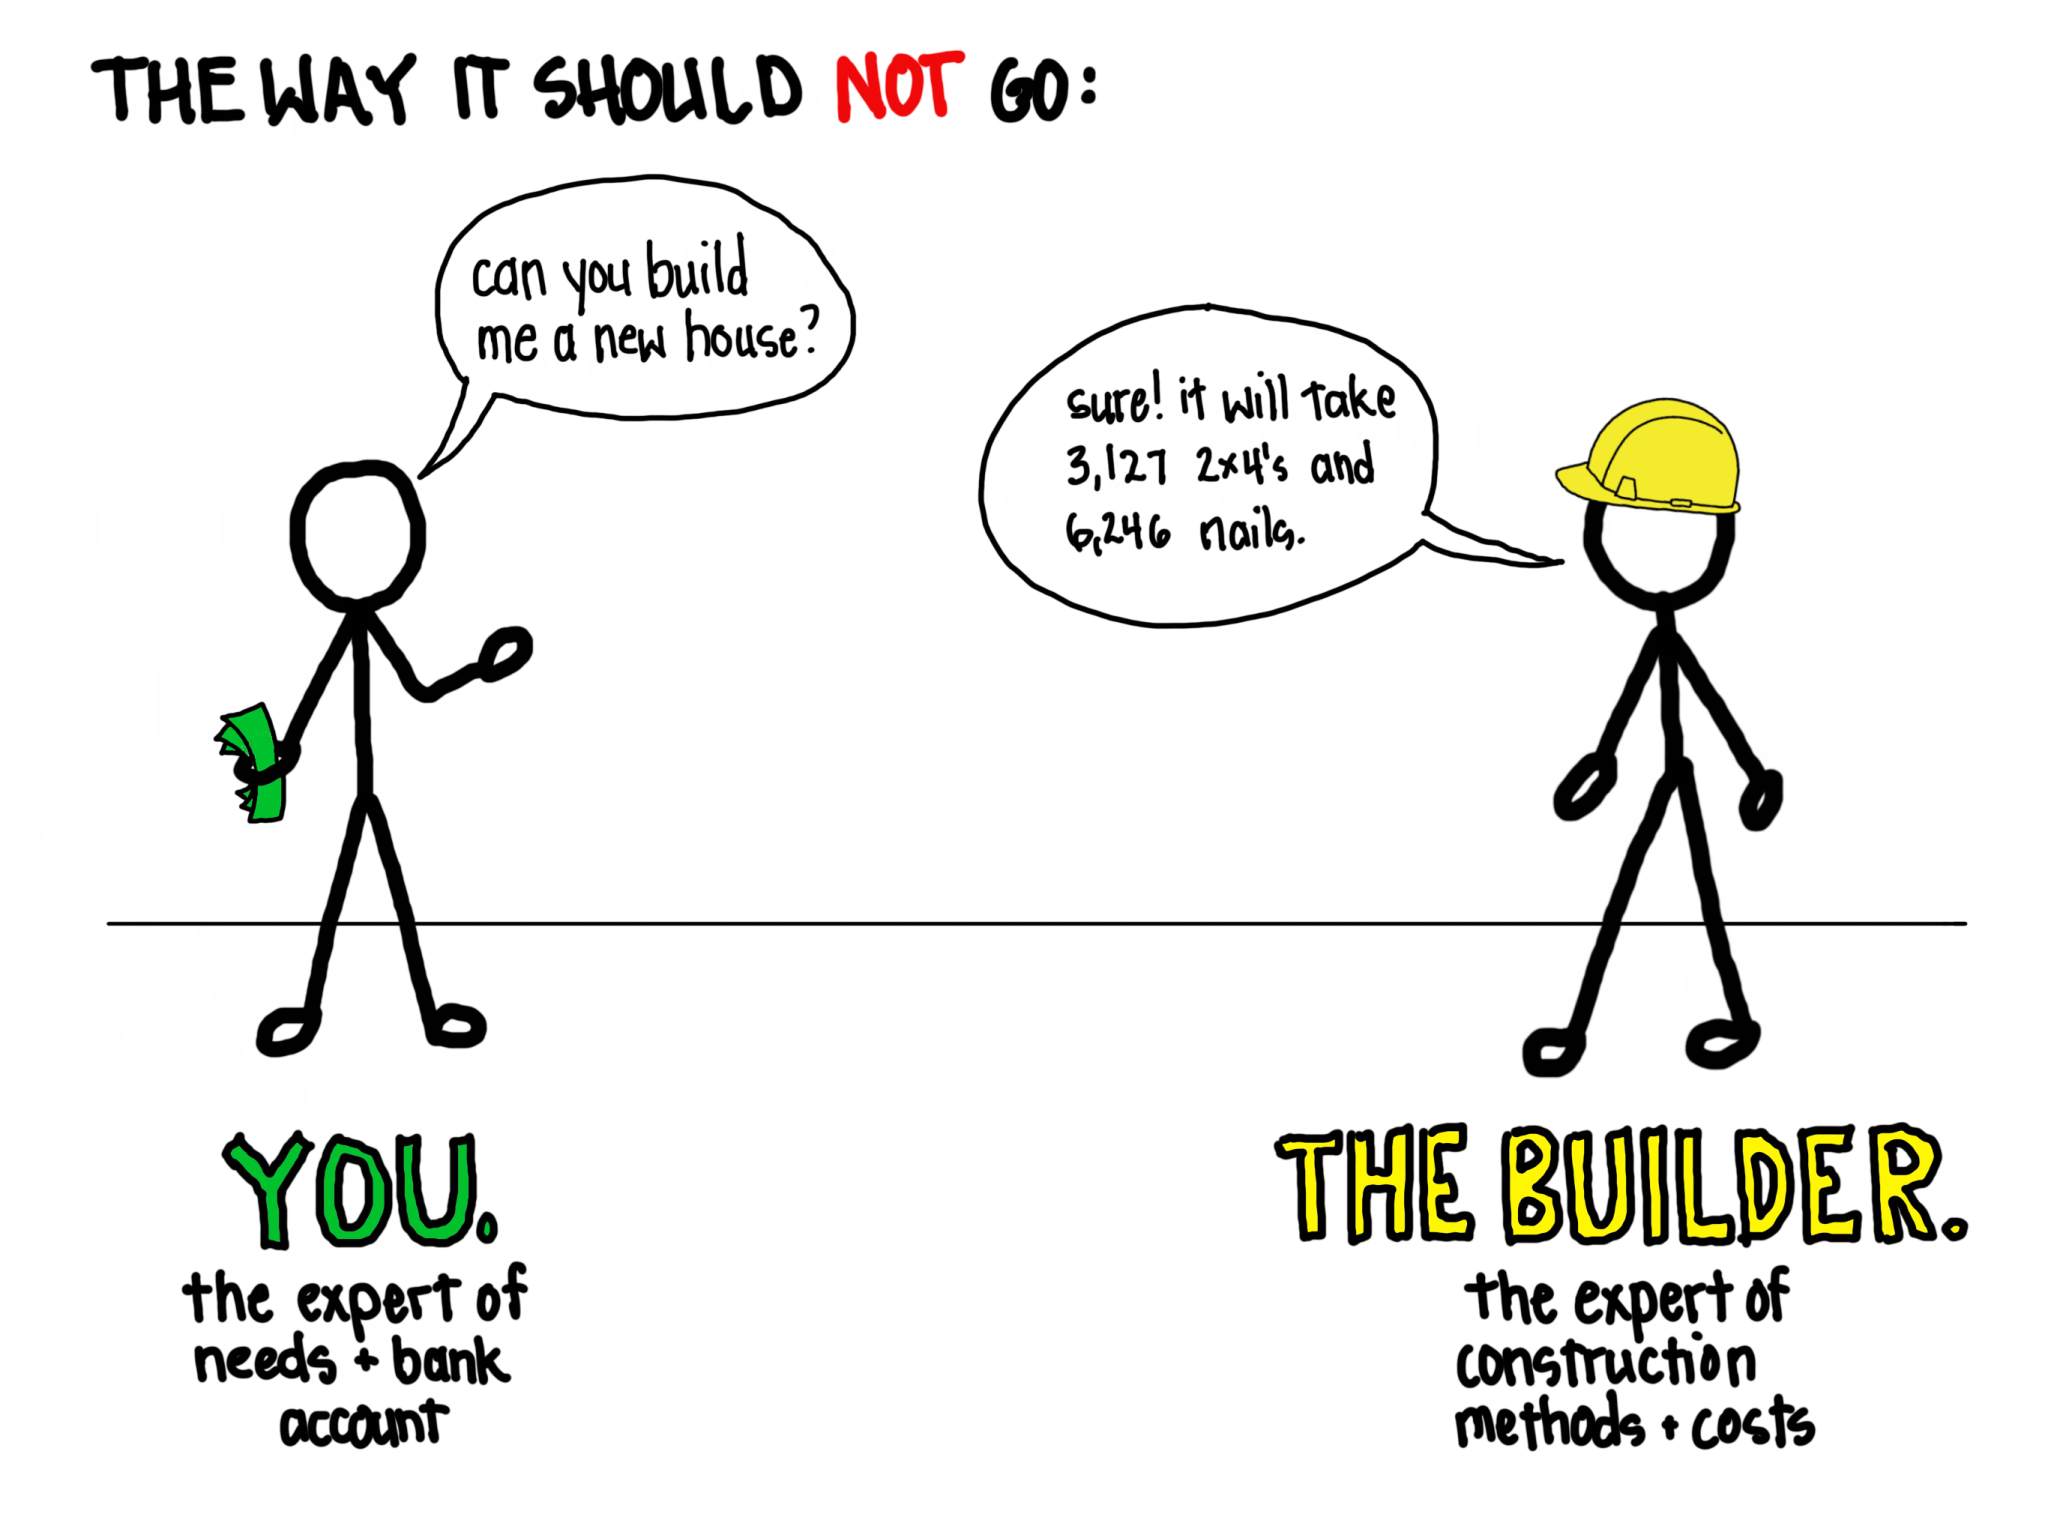 An illustration labelled "The way it should not go:" A stick figure on the left is holding cash saying "Can you build me a new house?" with a label underneath that says "You. The expert of needs + bank account" A stick figure on the left is wearing a hardhat saying "Sure! it will take 3,127 2x4's and 6,246 nails." with a label underneath that says "the builder. the expert of construction methods + costs"